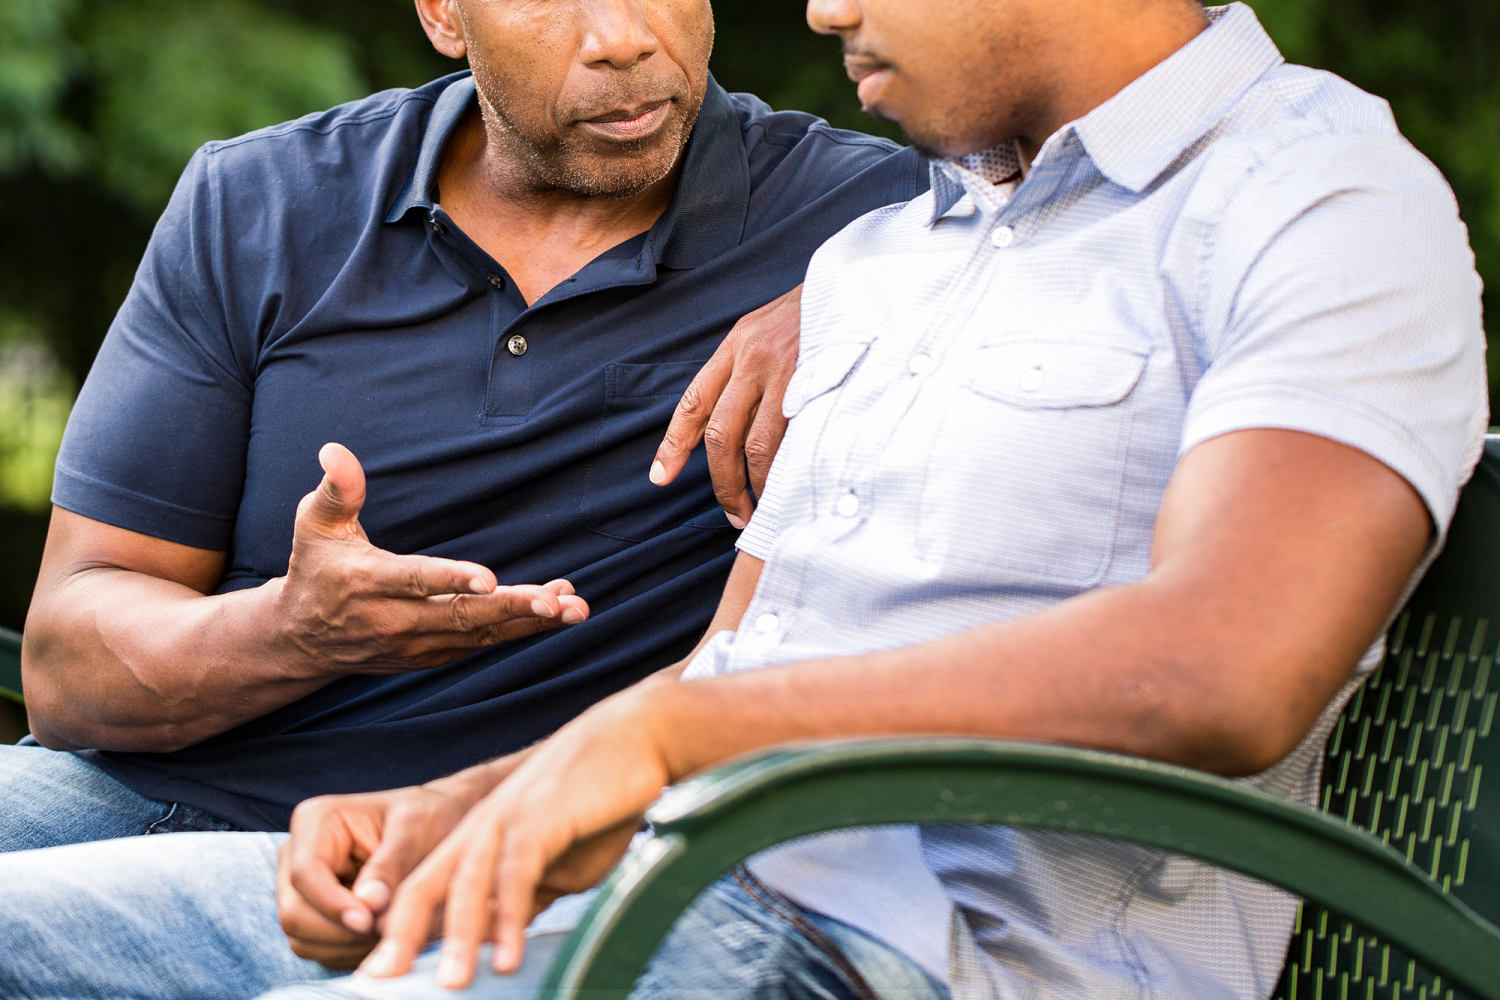 Latino and Black dads often underestimate when teen sons are sexually active, delaying safe sex advice